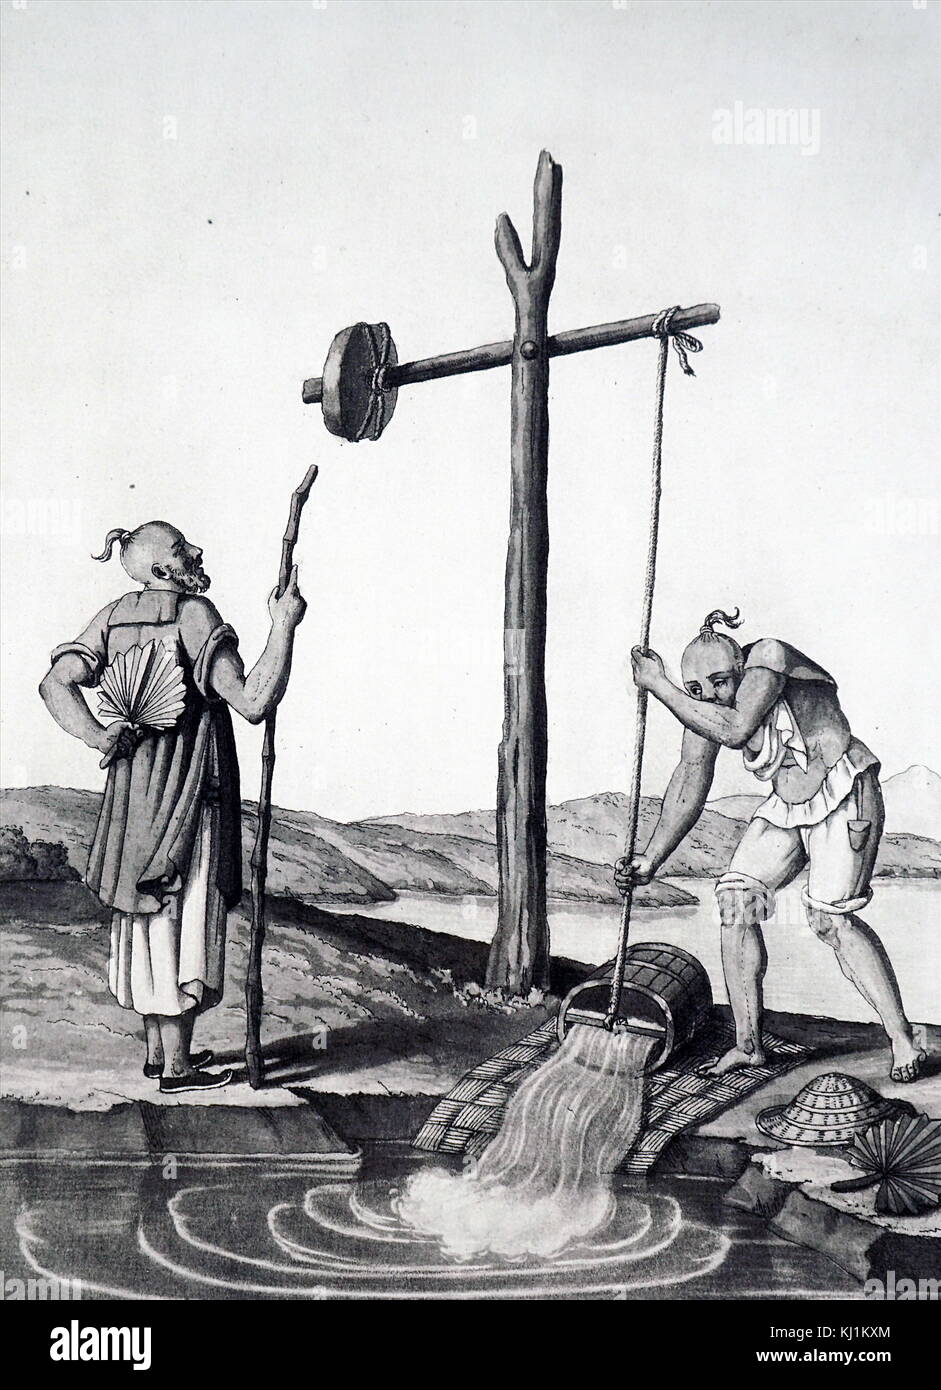 Engraving depicting the raising of water by means of a shadoof. A shadoof is a pole with a bucket and counterpoise used especially in Egypt for raising water. Dated 19th Century Stock Photo